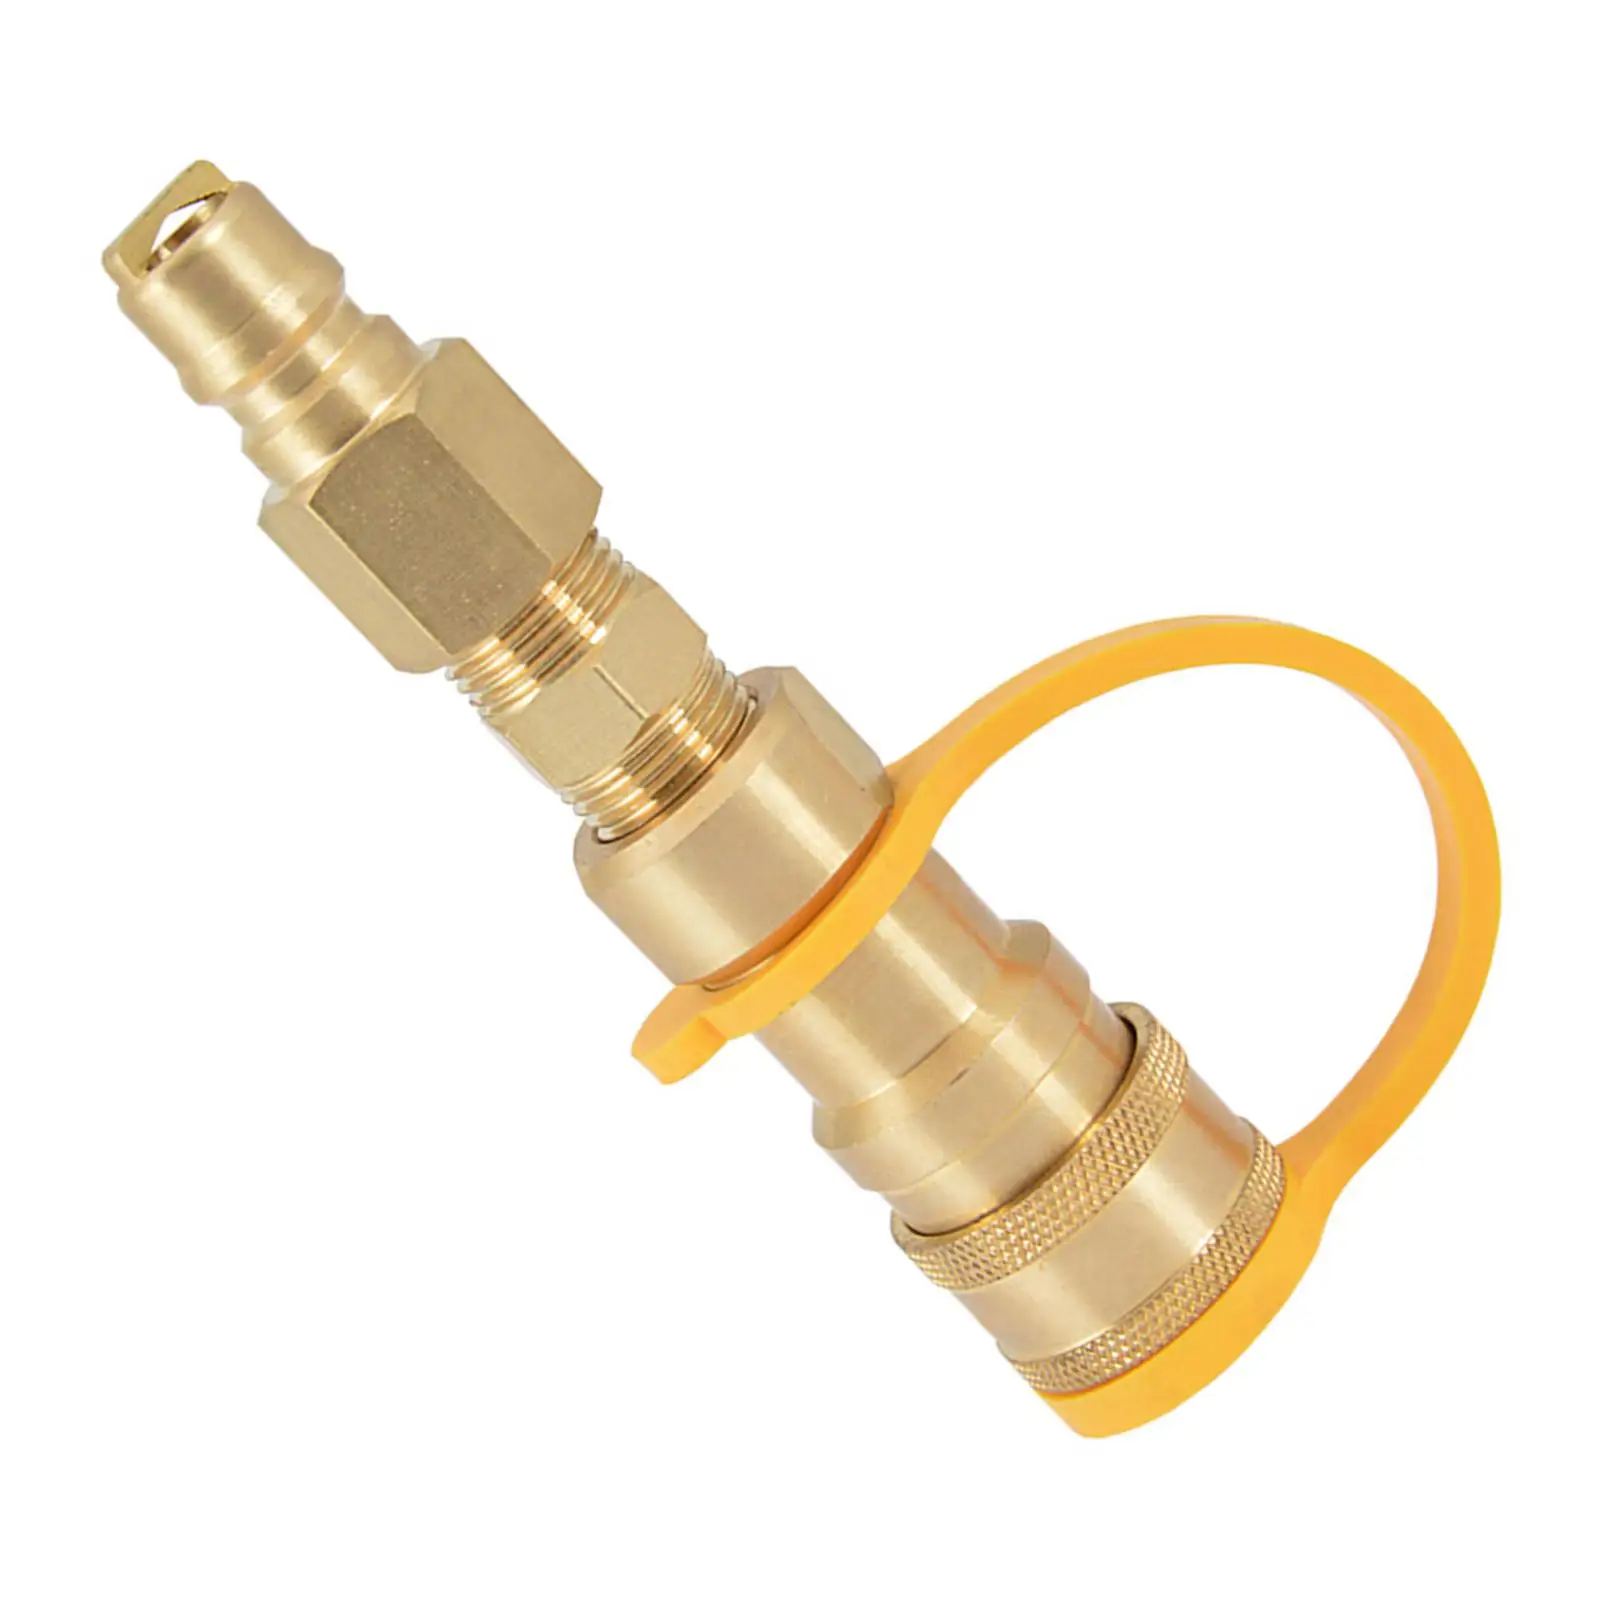 Propane Quick Connector Fitting 1lb Disposal Tank Regulator Adapter for Fire RV Cooker Accessories